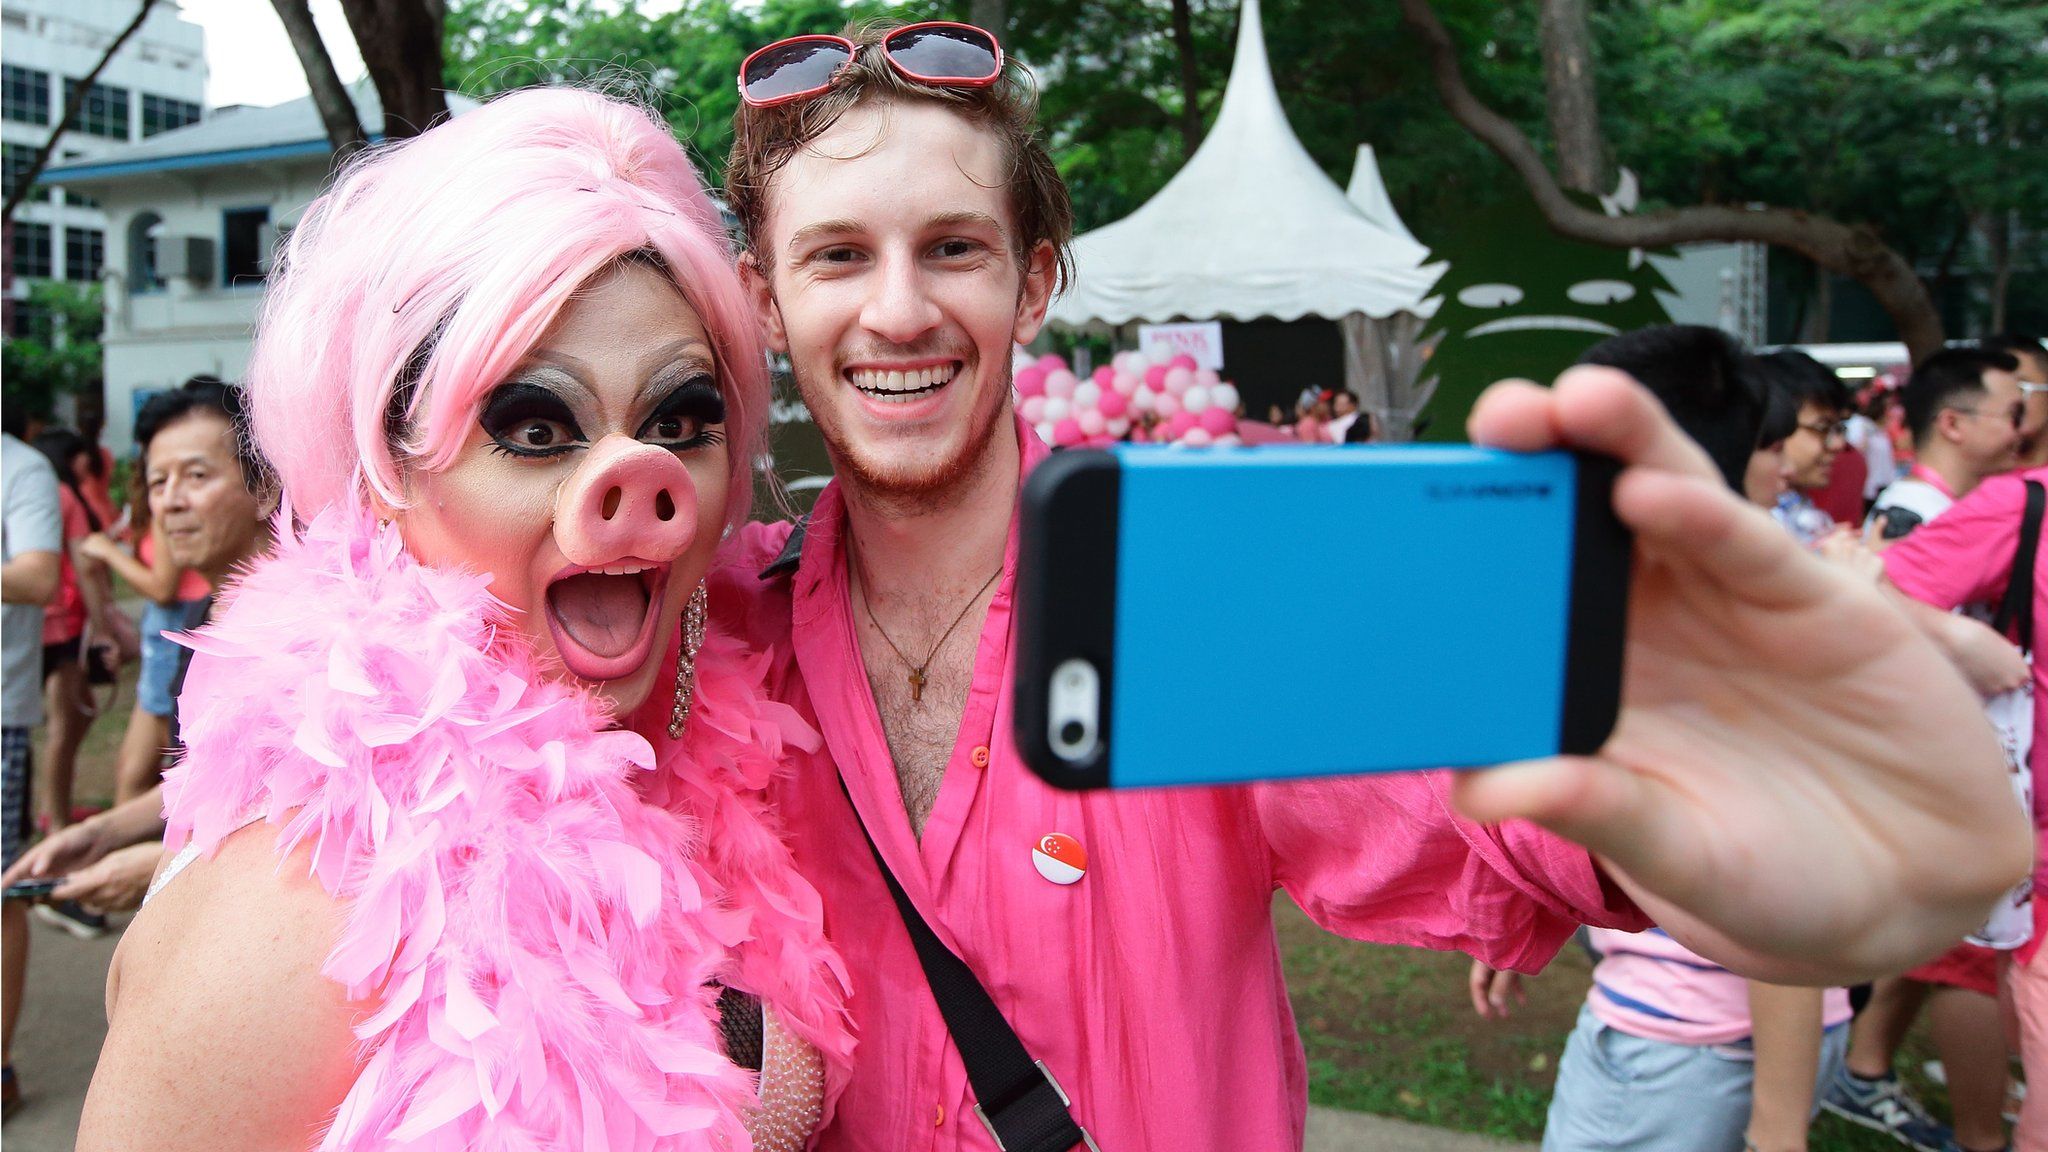 Participants dress in various shades of pink take a selfie during the 'Pink Dot SG' event at Hong Lim Park on June 13, 2015 in Singapore.